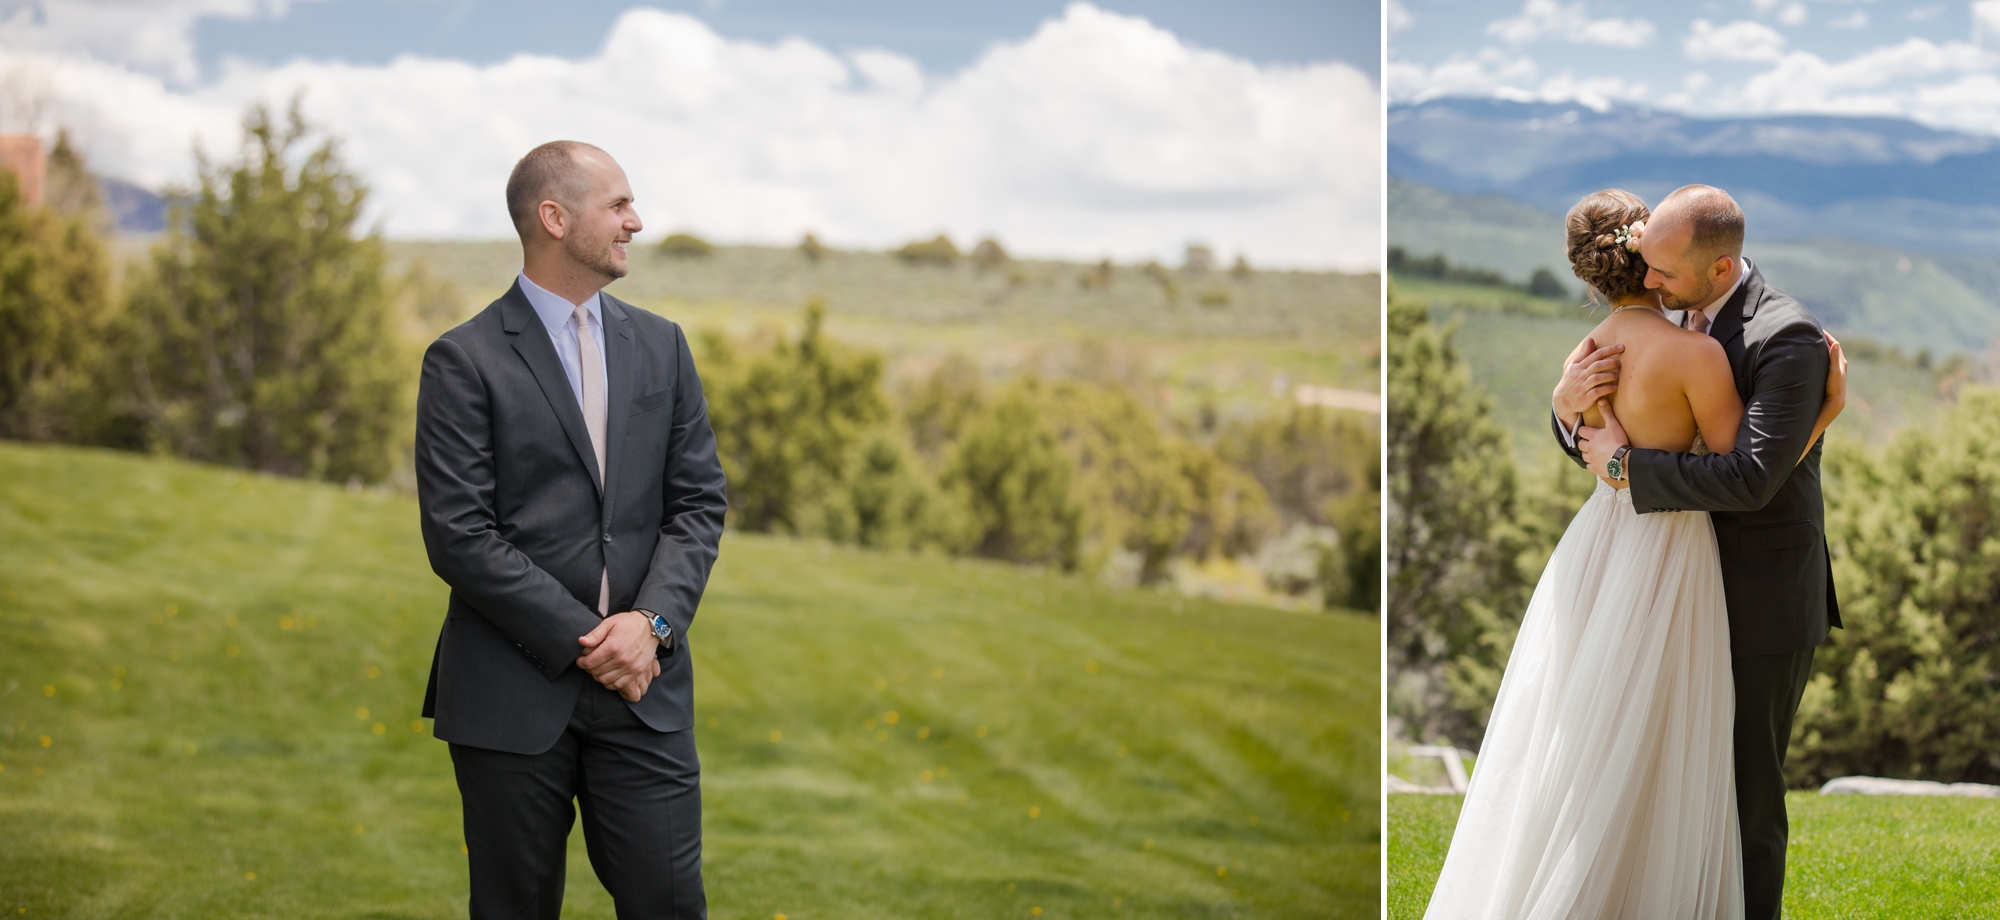 bride and groom first look at Colorado mountain wedding